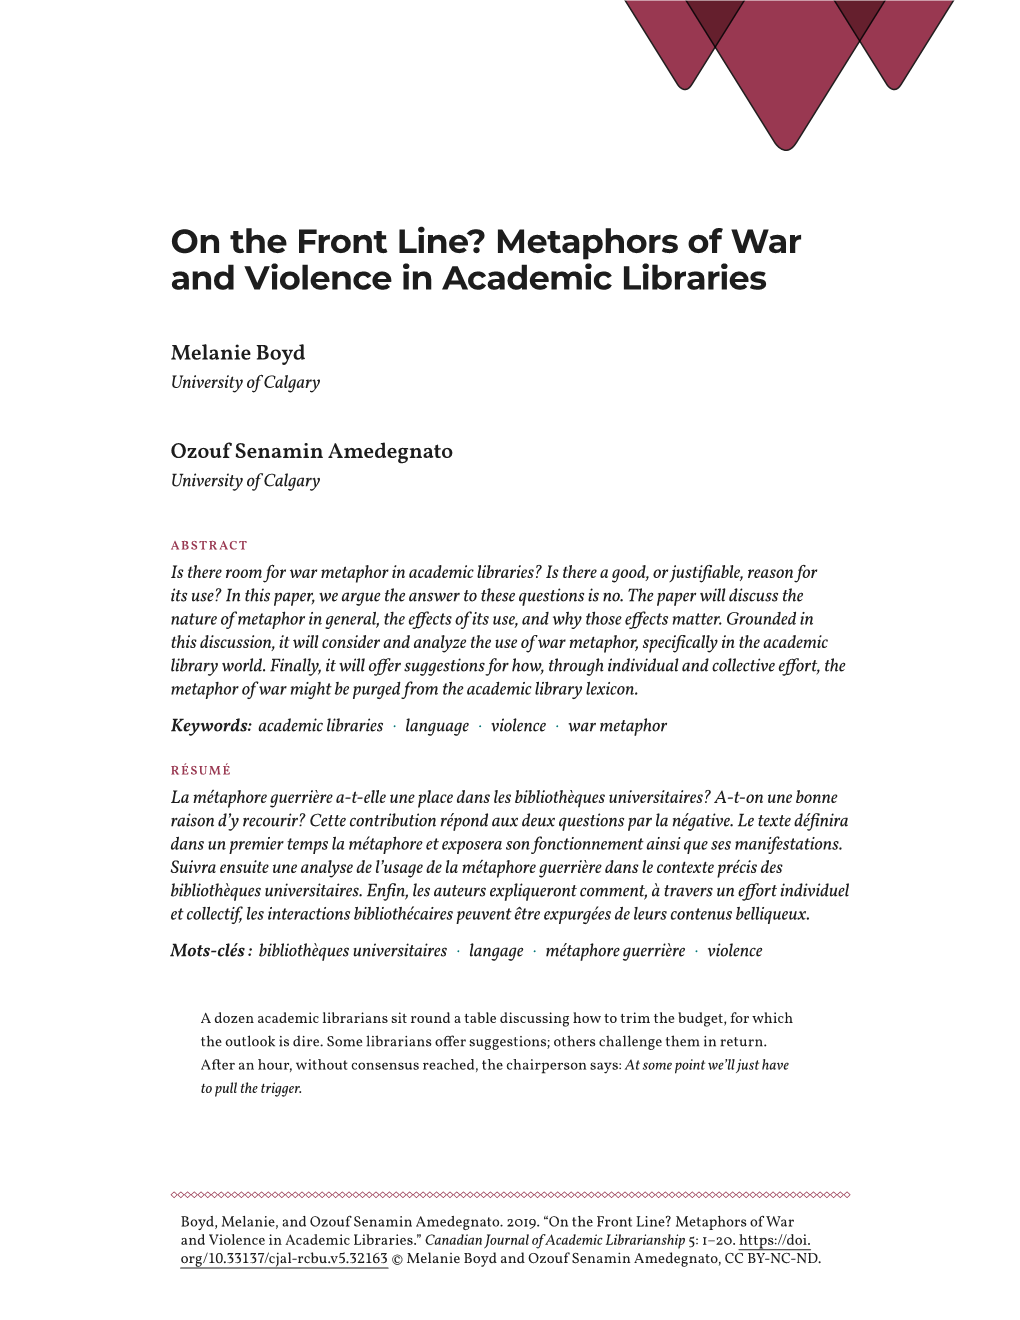 On the Front Line? Metaphors of War and Violence in Academic Libraries